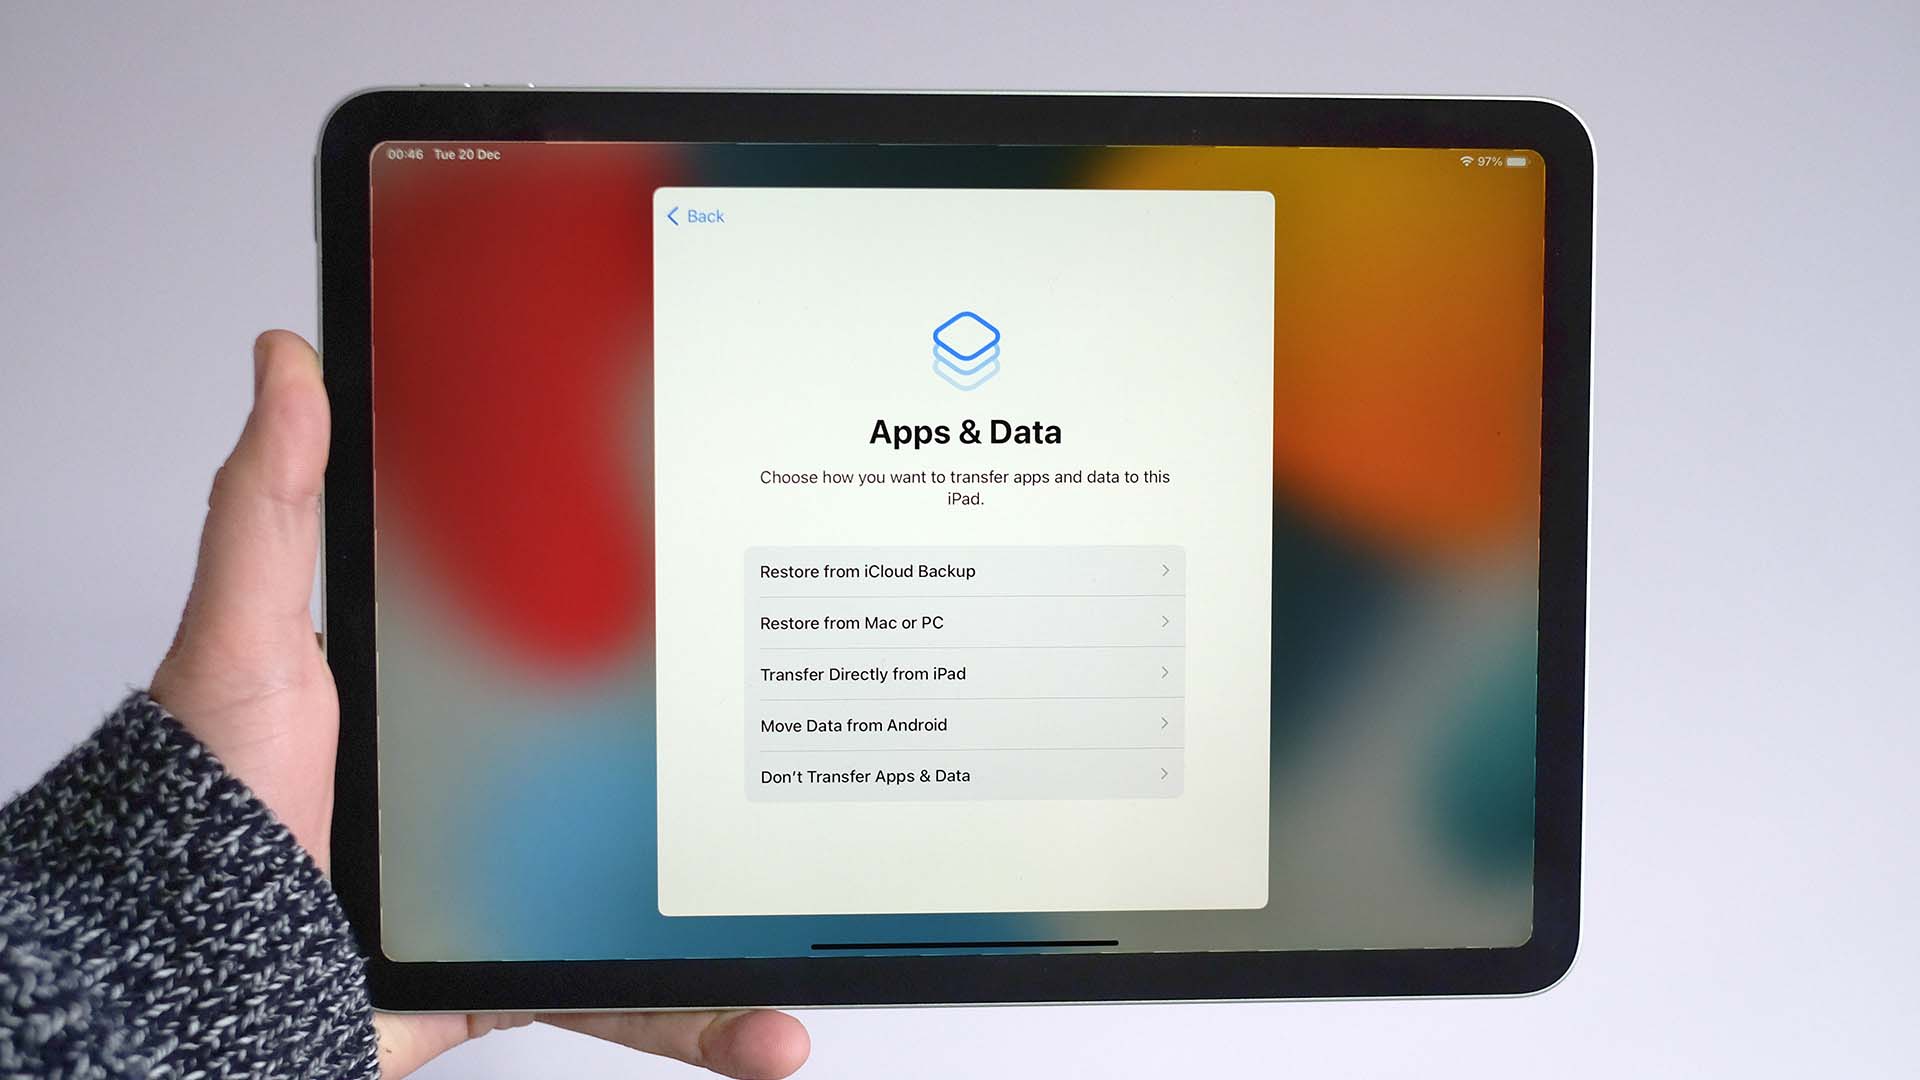 An iPad with the screen showing the options for apps and data